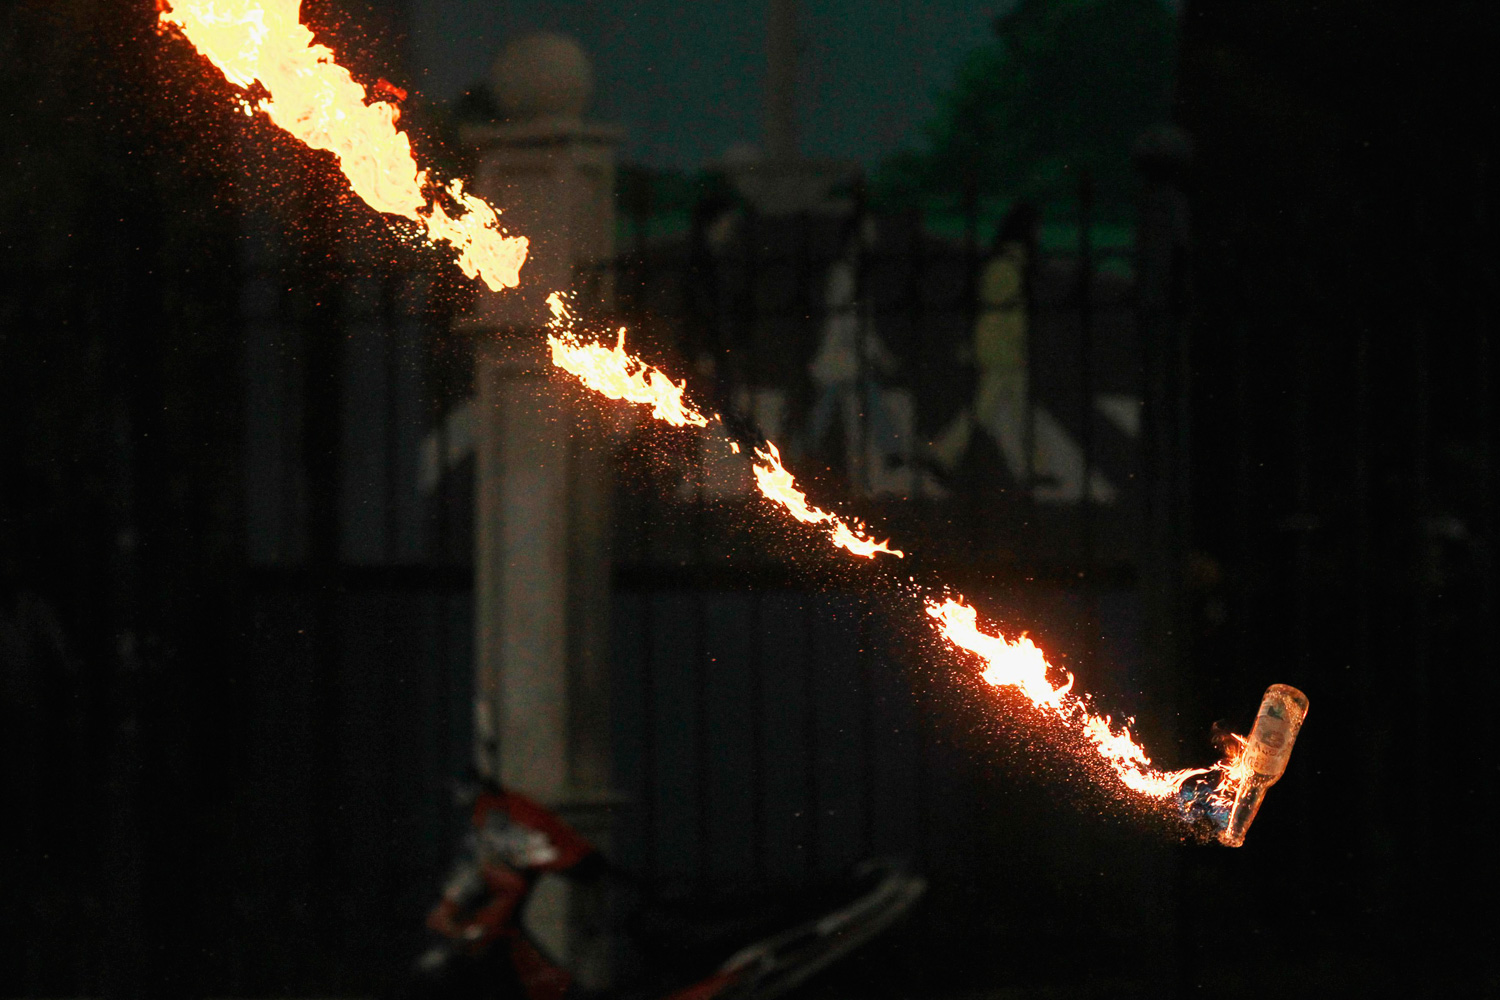 March 27, 2012. A Molotov cocktail is thrown during a clash between student protesters and the government against plans to raise fuel prices in Jakarta.